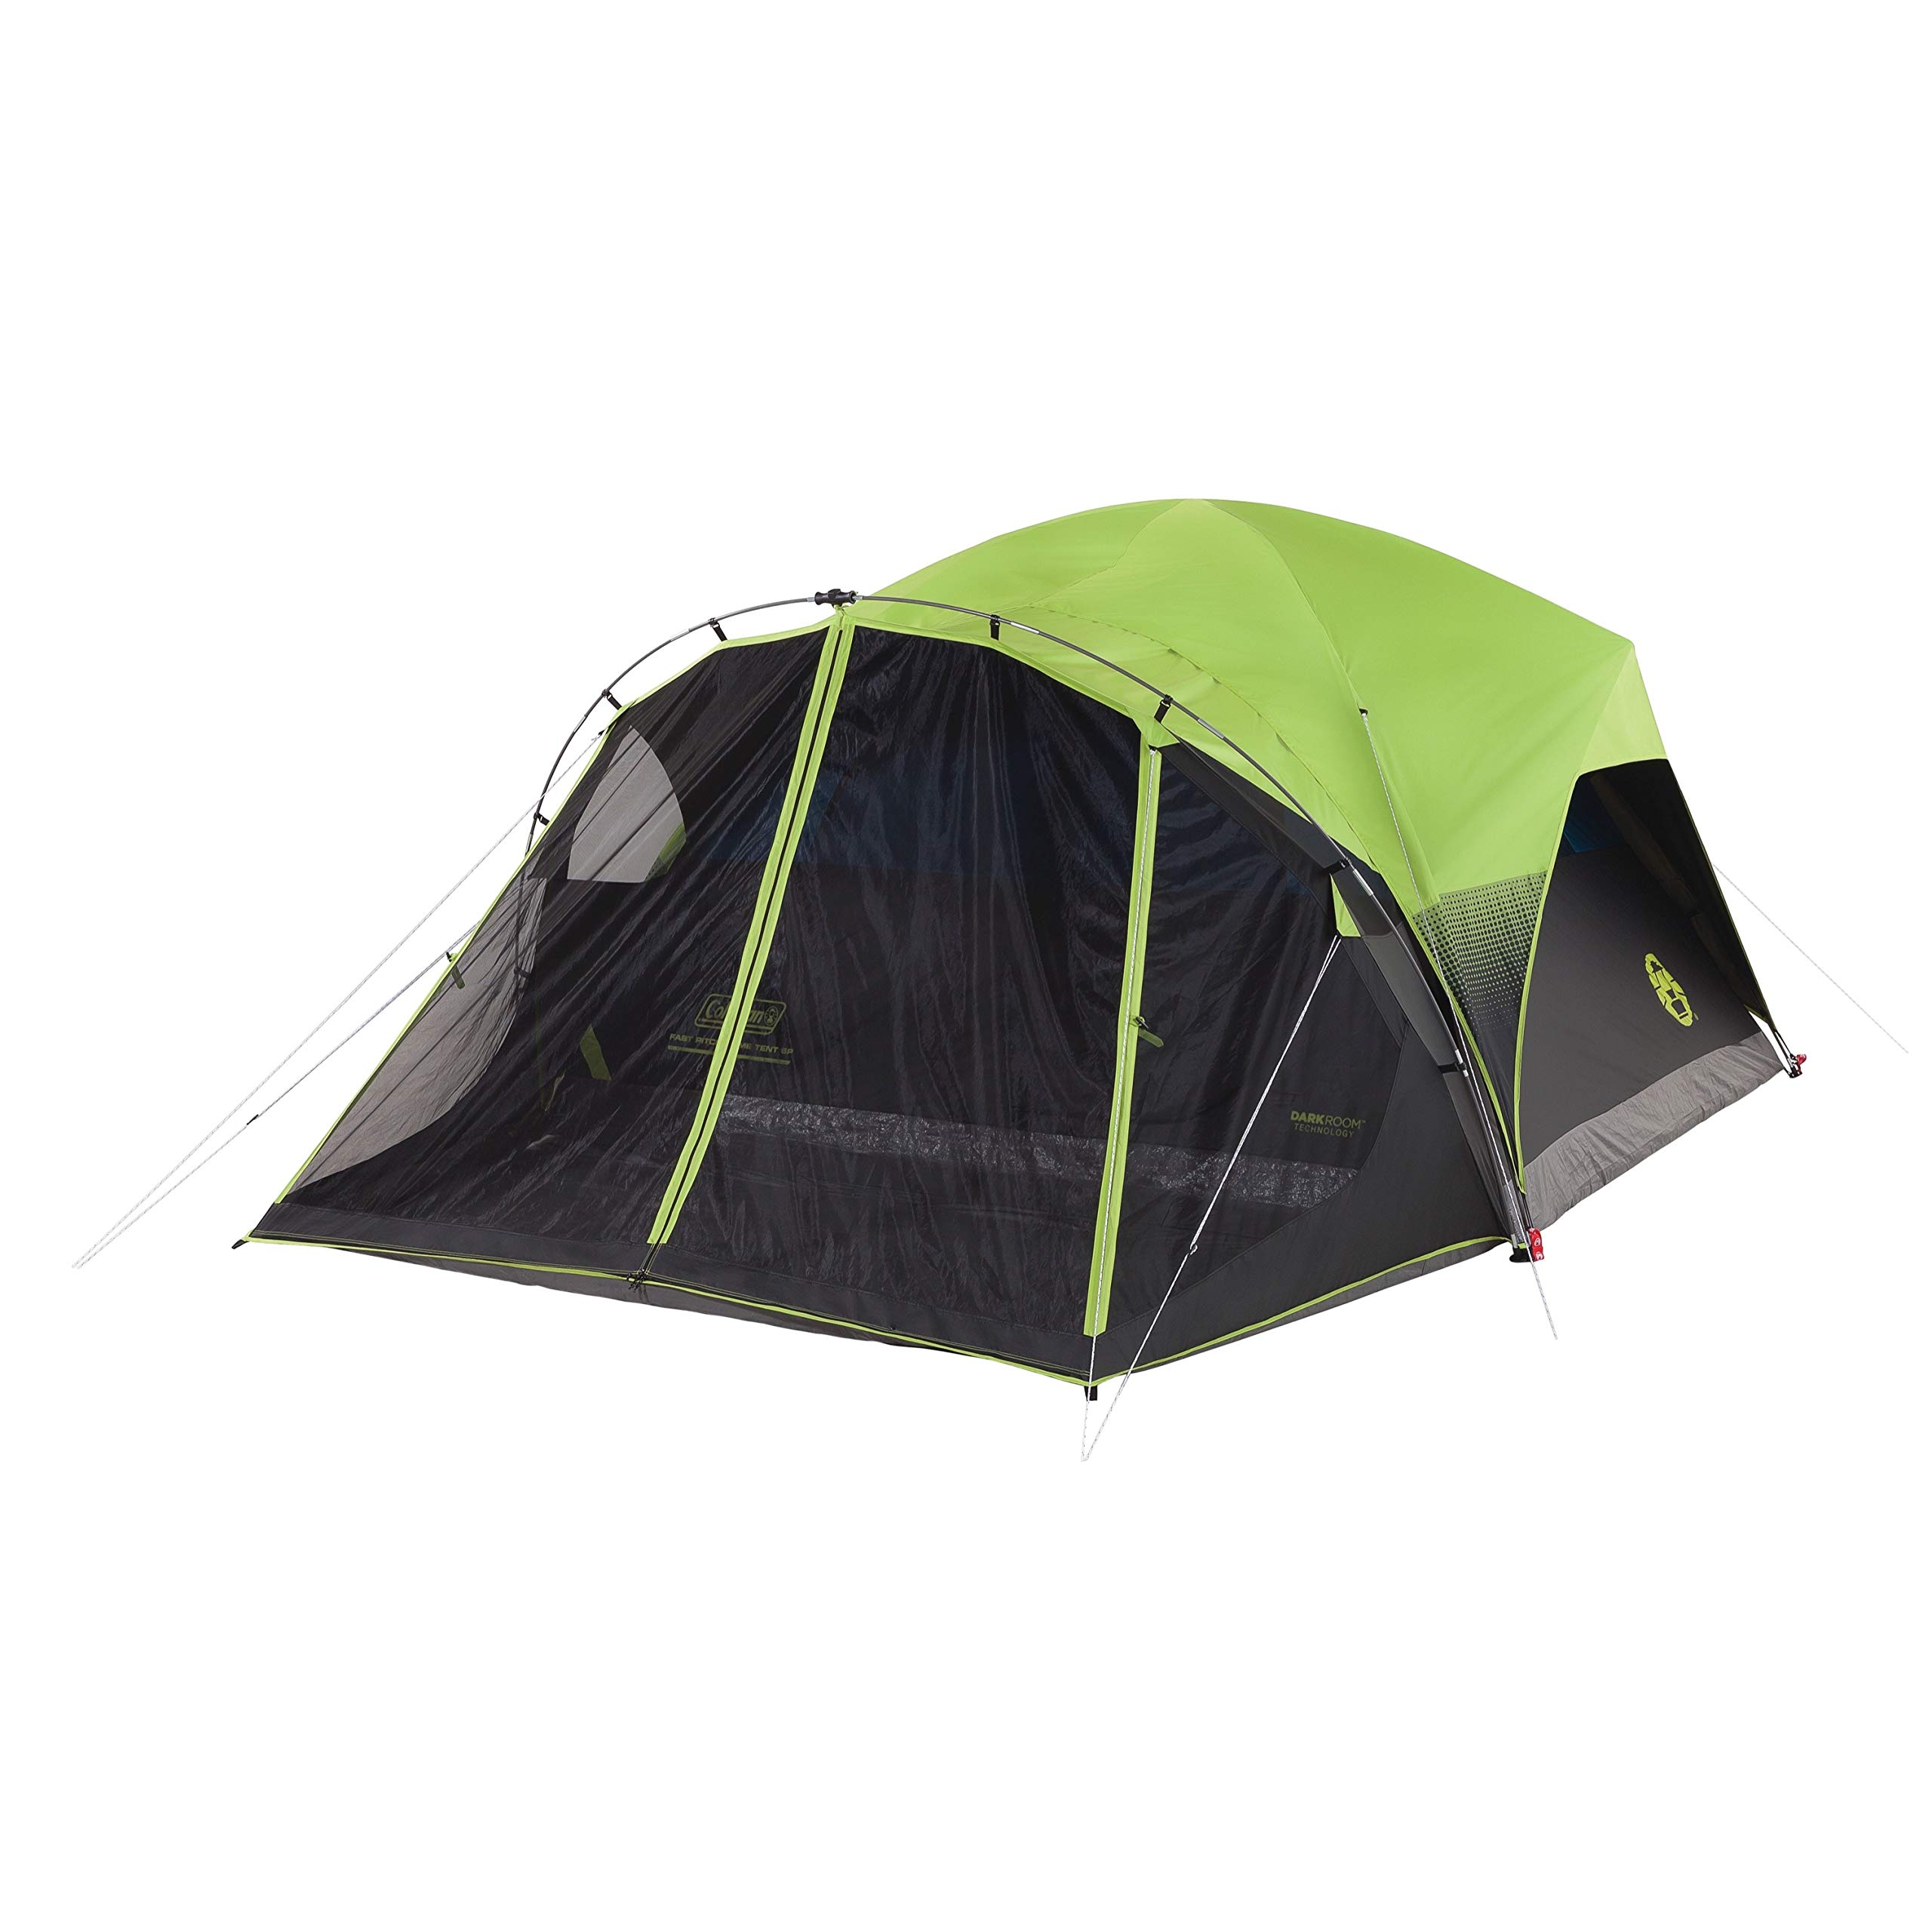 10' x 9' Coleman 6 Person Carlsbad Dark Room Dome Camping Tent w/ Screened Porch (Green/Black) $130 + Free Shipping